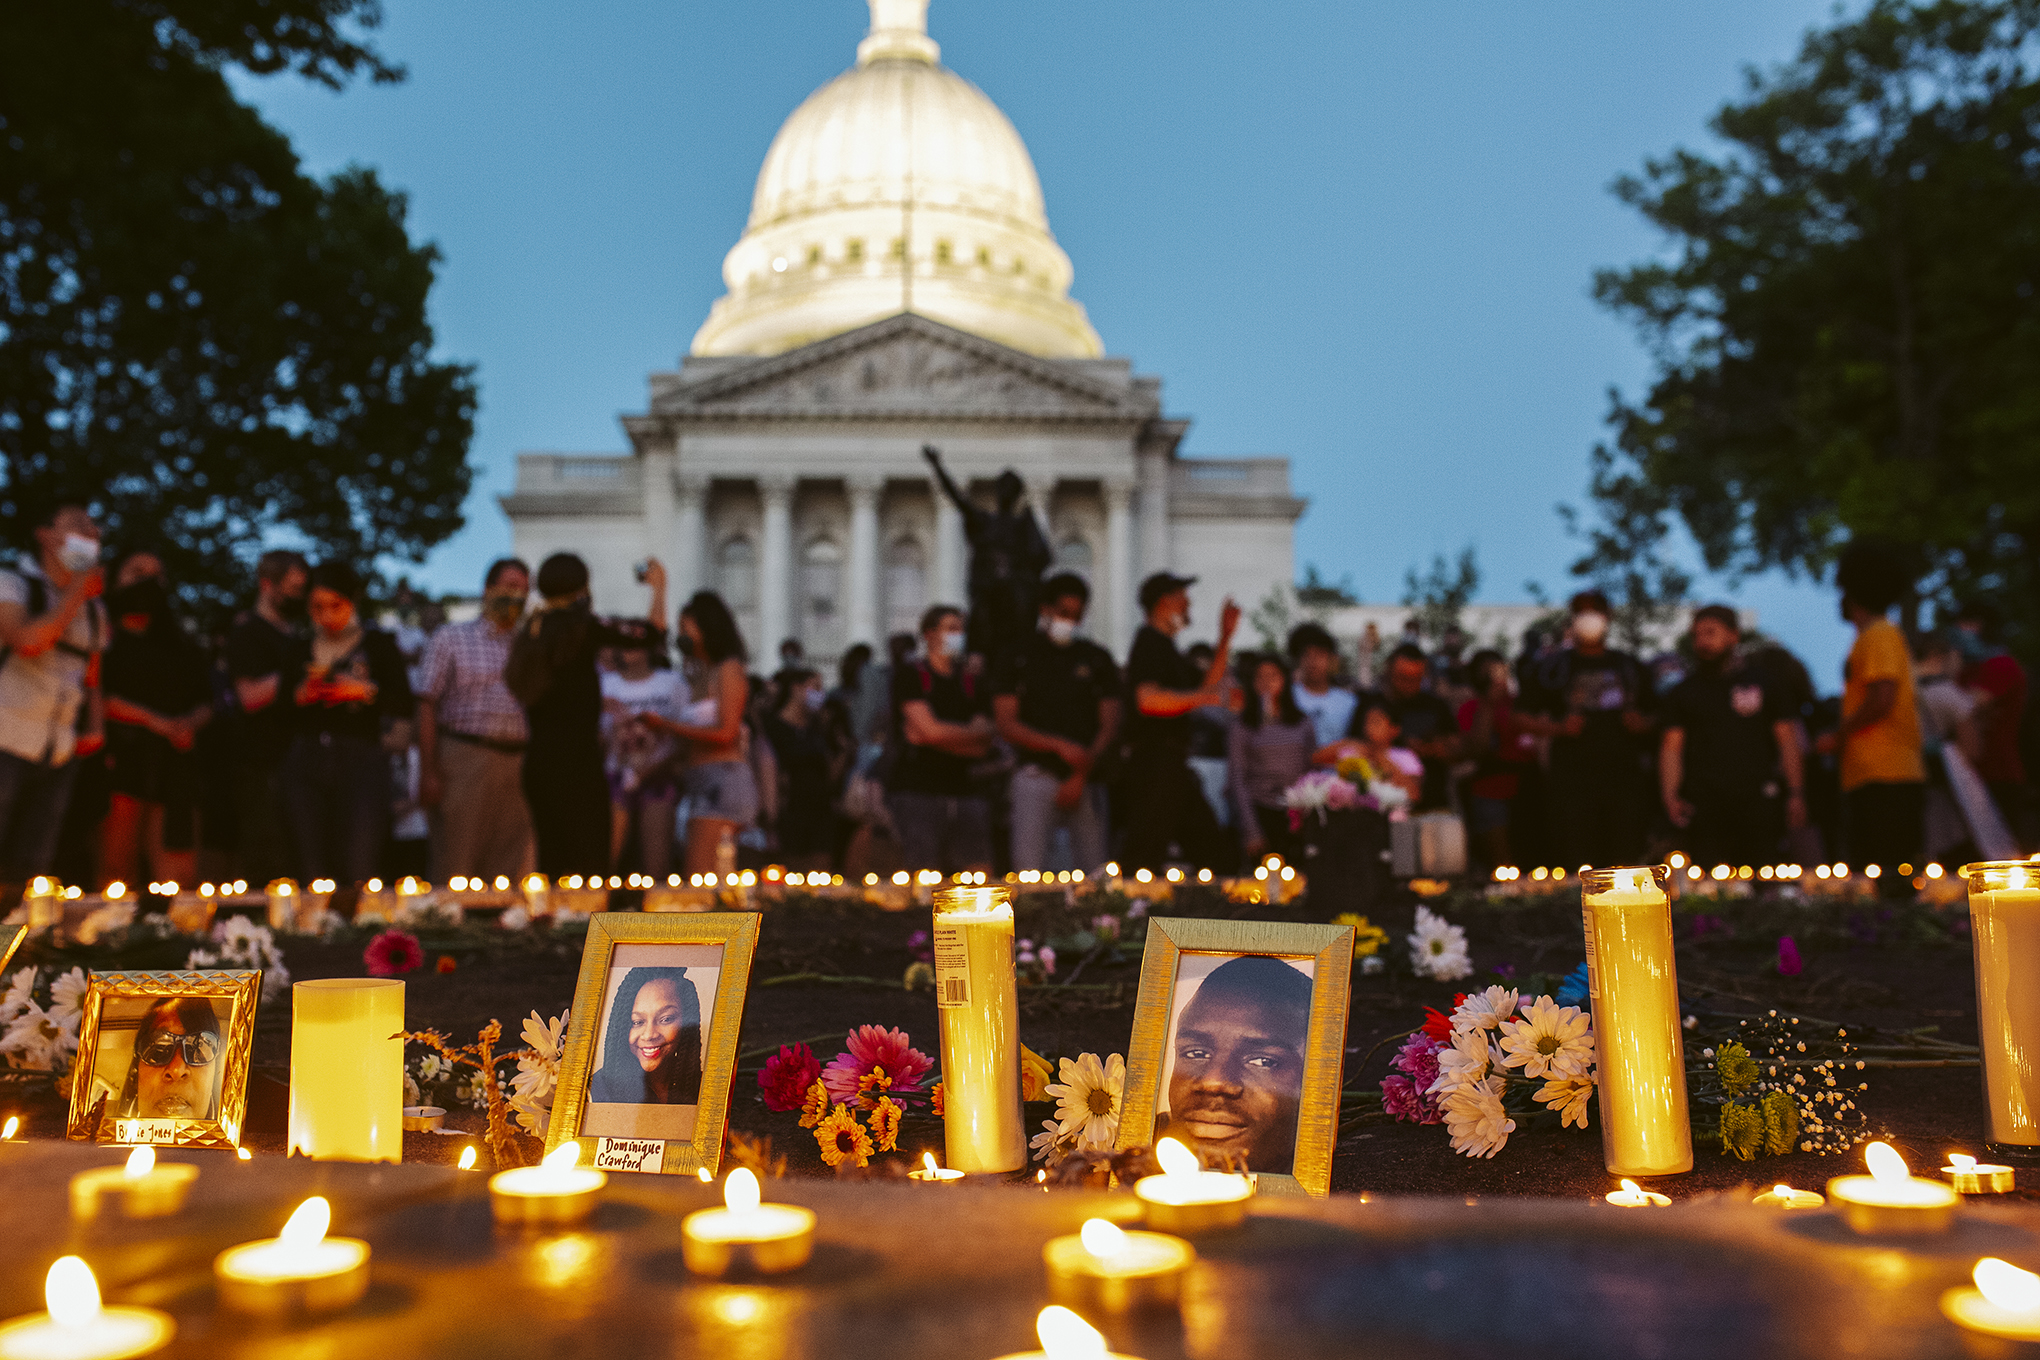 Photos and candles honor black people killed by police